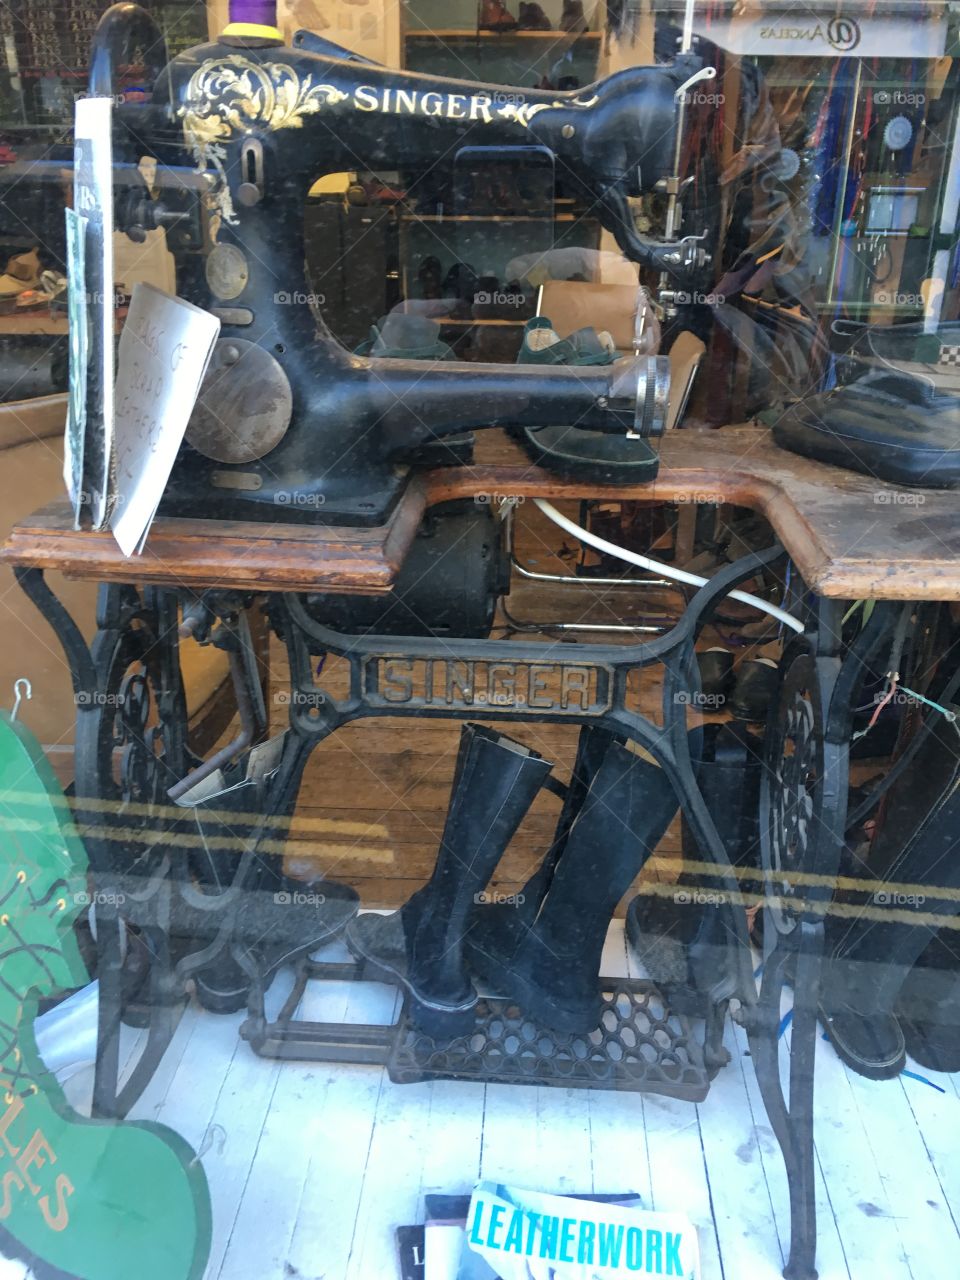 Traditional Sewing machine, heavily used in the UK historically. 